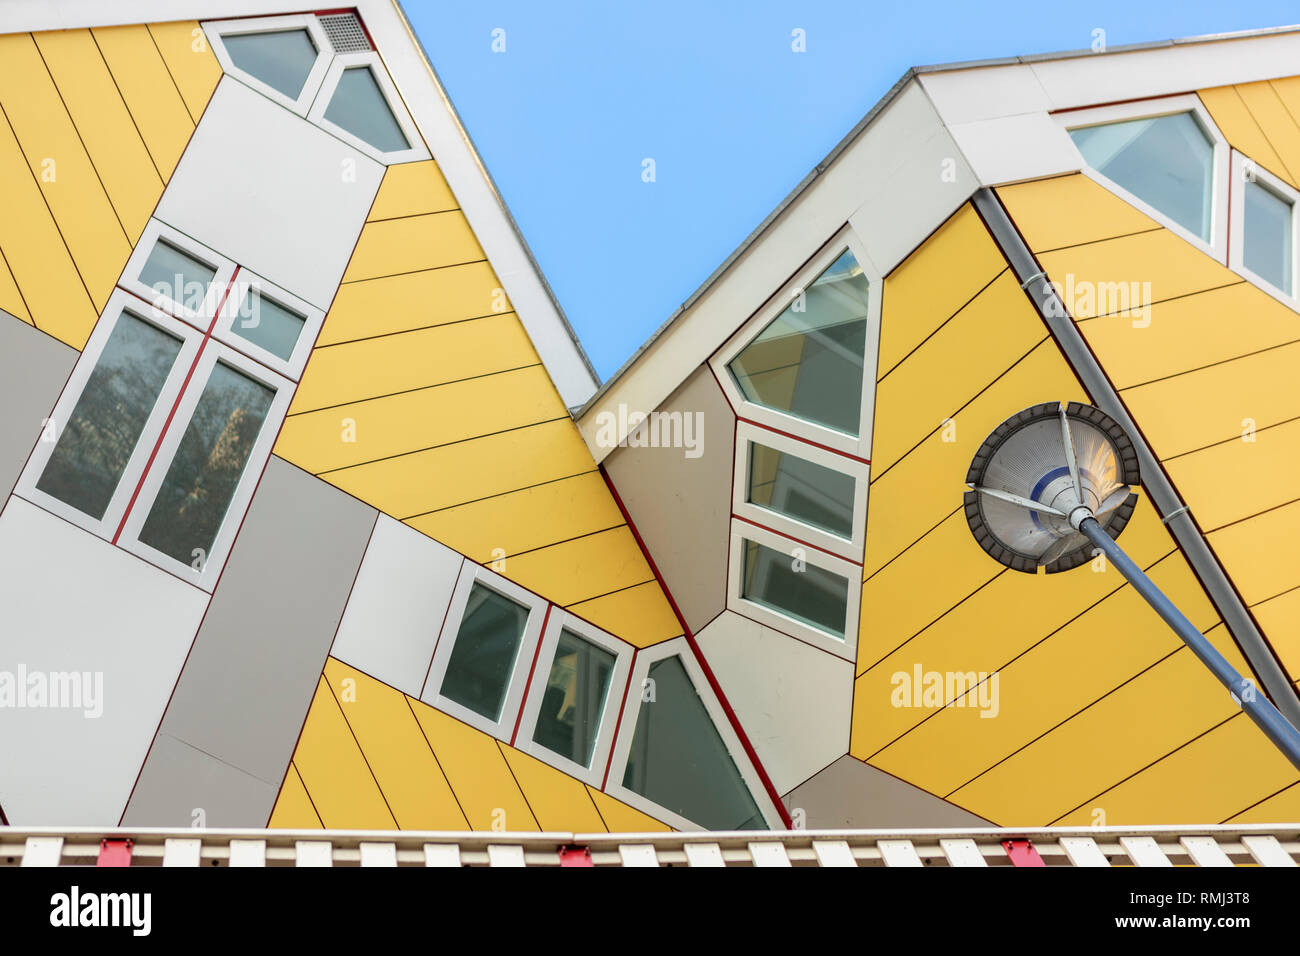 Detail view of two of the famous tilted cube houses in Rotterdam, The Netherlands, with in the foreground a lantern pole Stock Photo